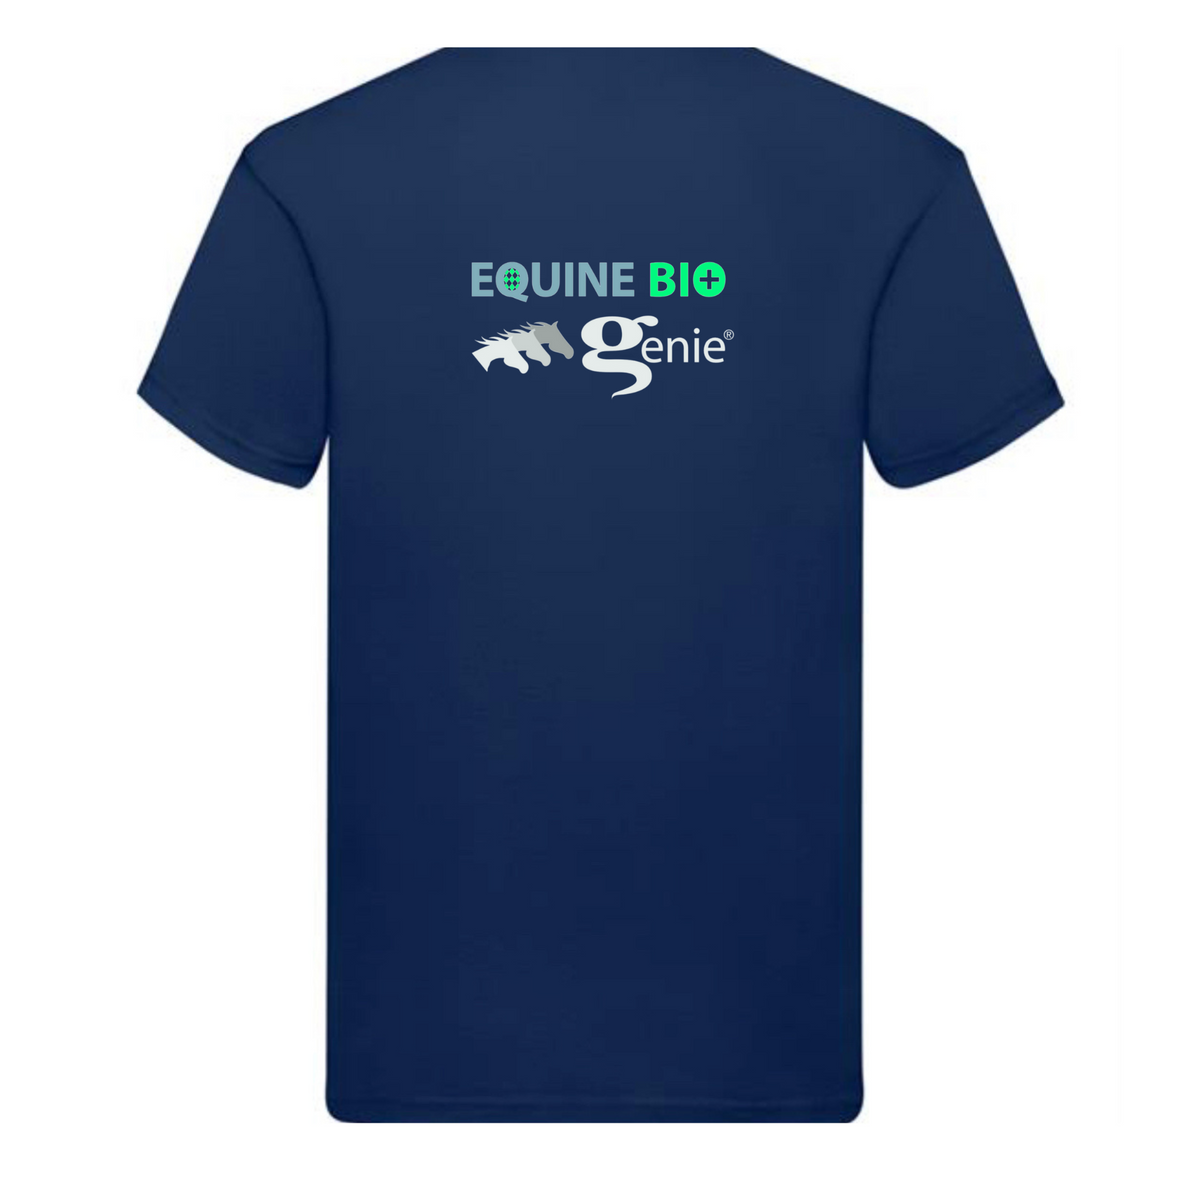 Stand out from the crowd with the EBG Team T-shirt